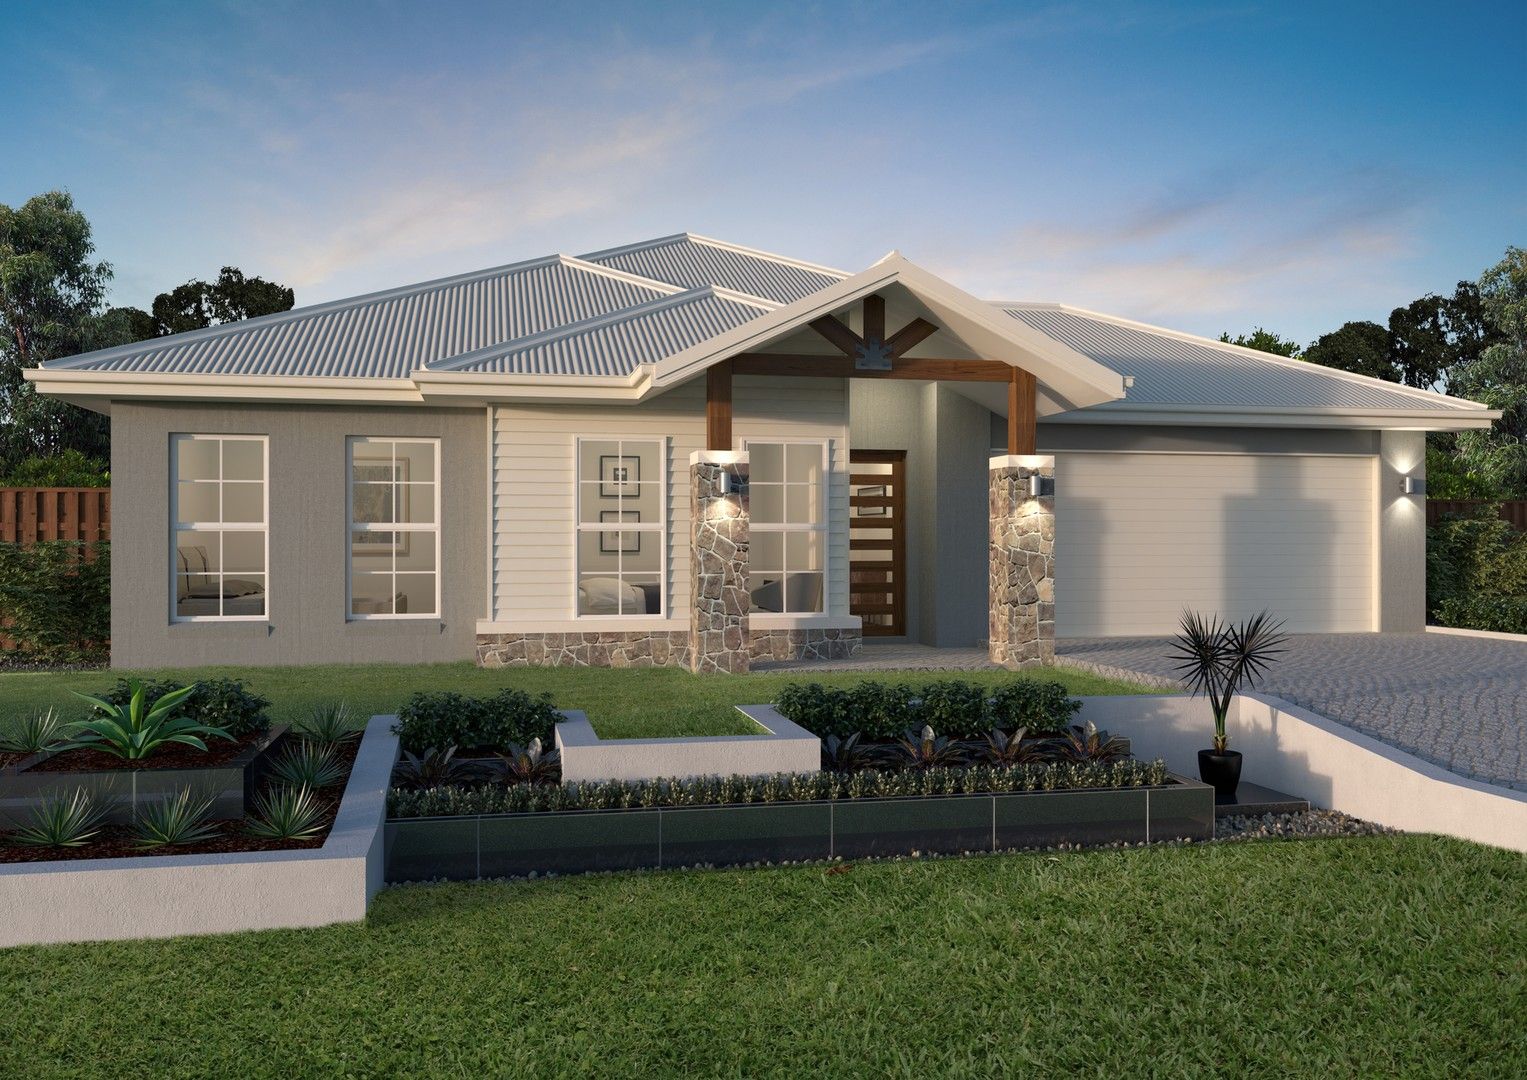 4 bedrooms New House & Land in Lot 5 Hoya Rd 